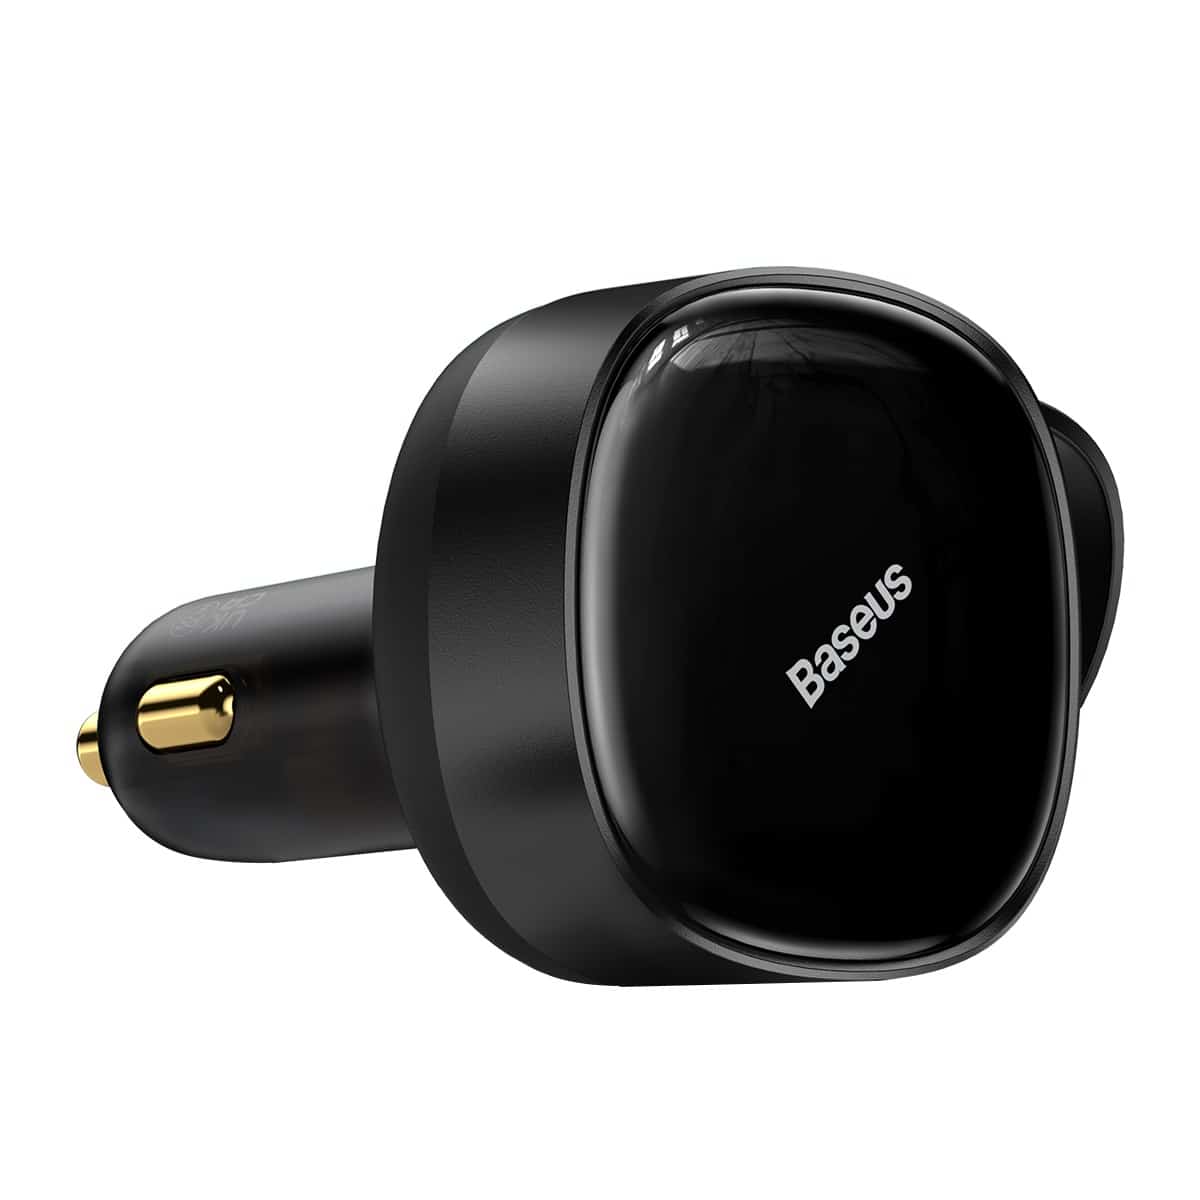 Baseus Enjoyment Retractable 2 in 1 Car Charger C+L 30w with Retractable Cable Black